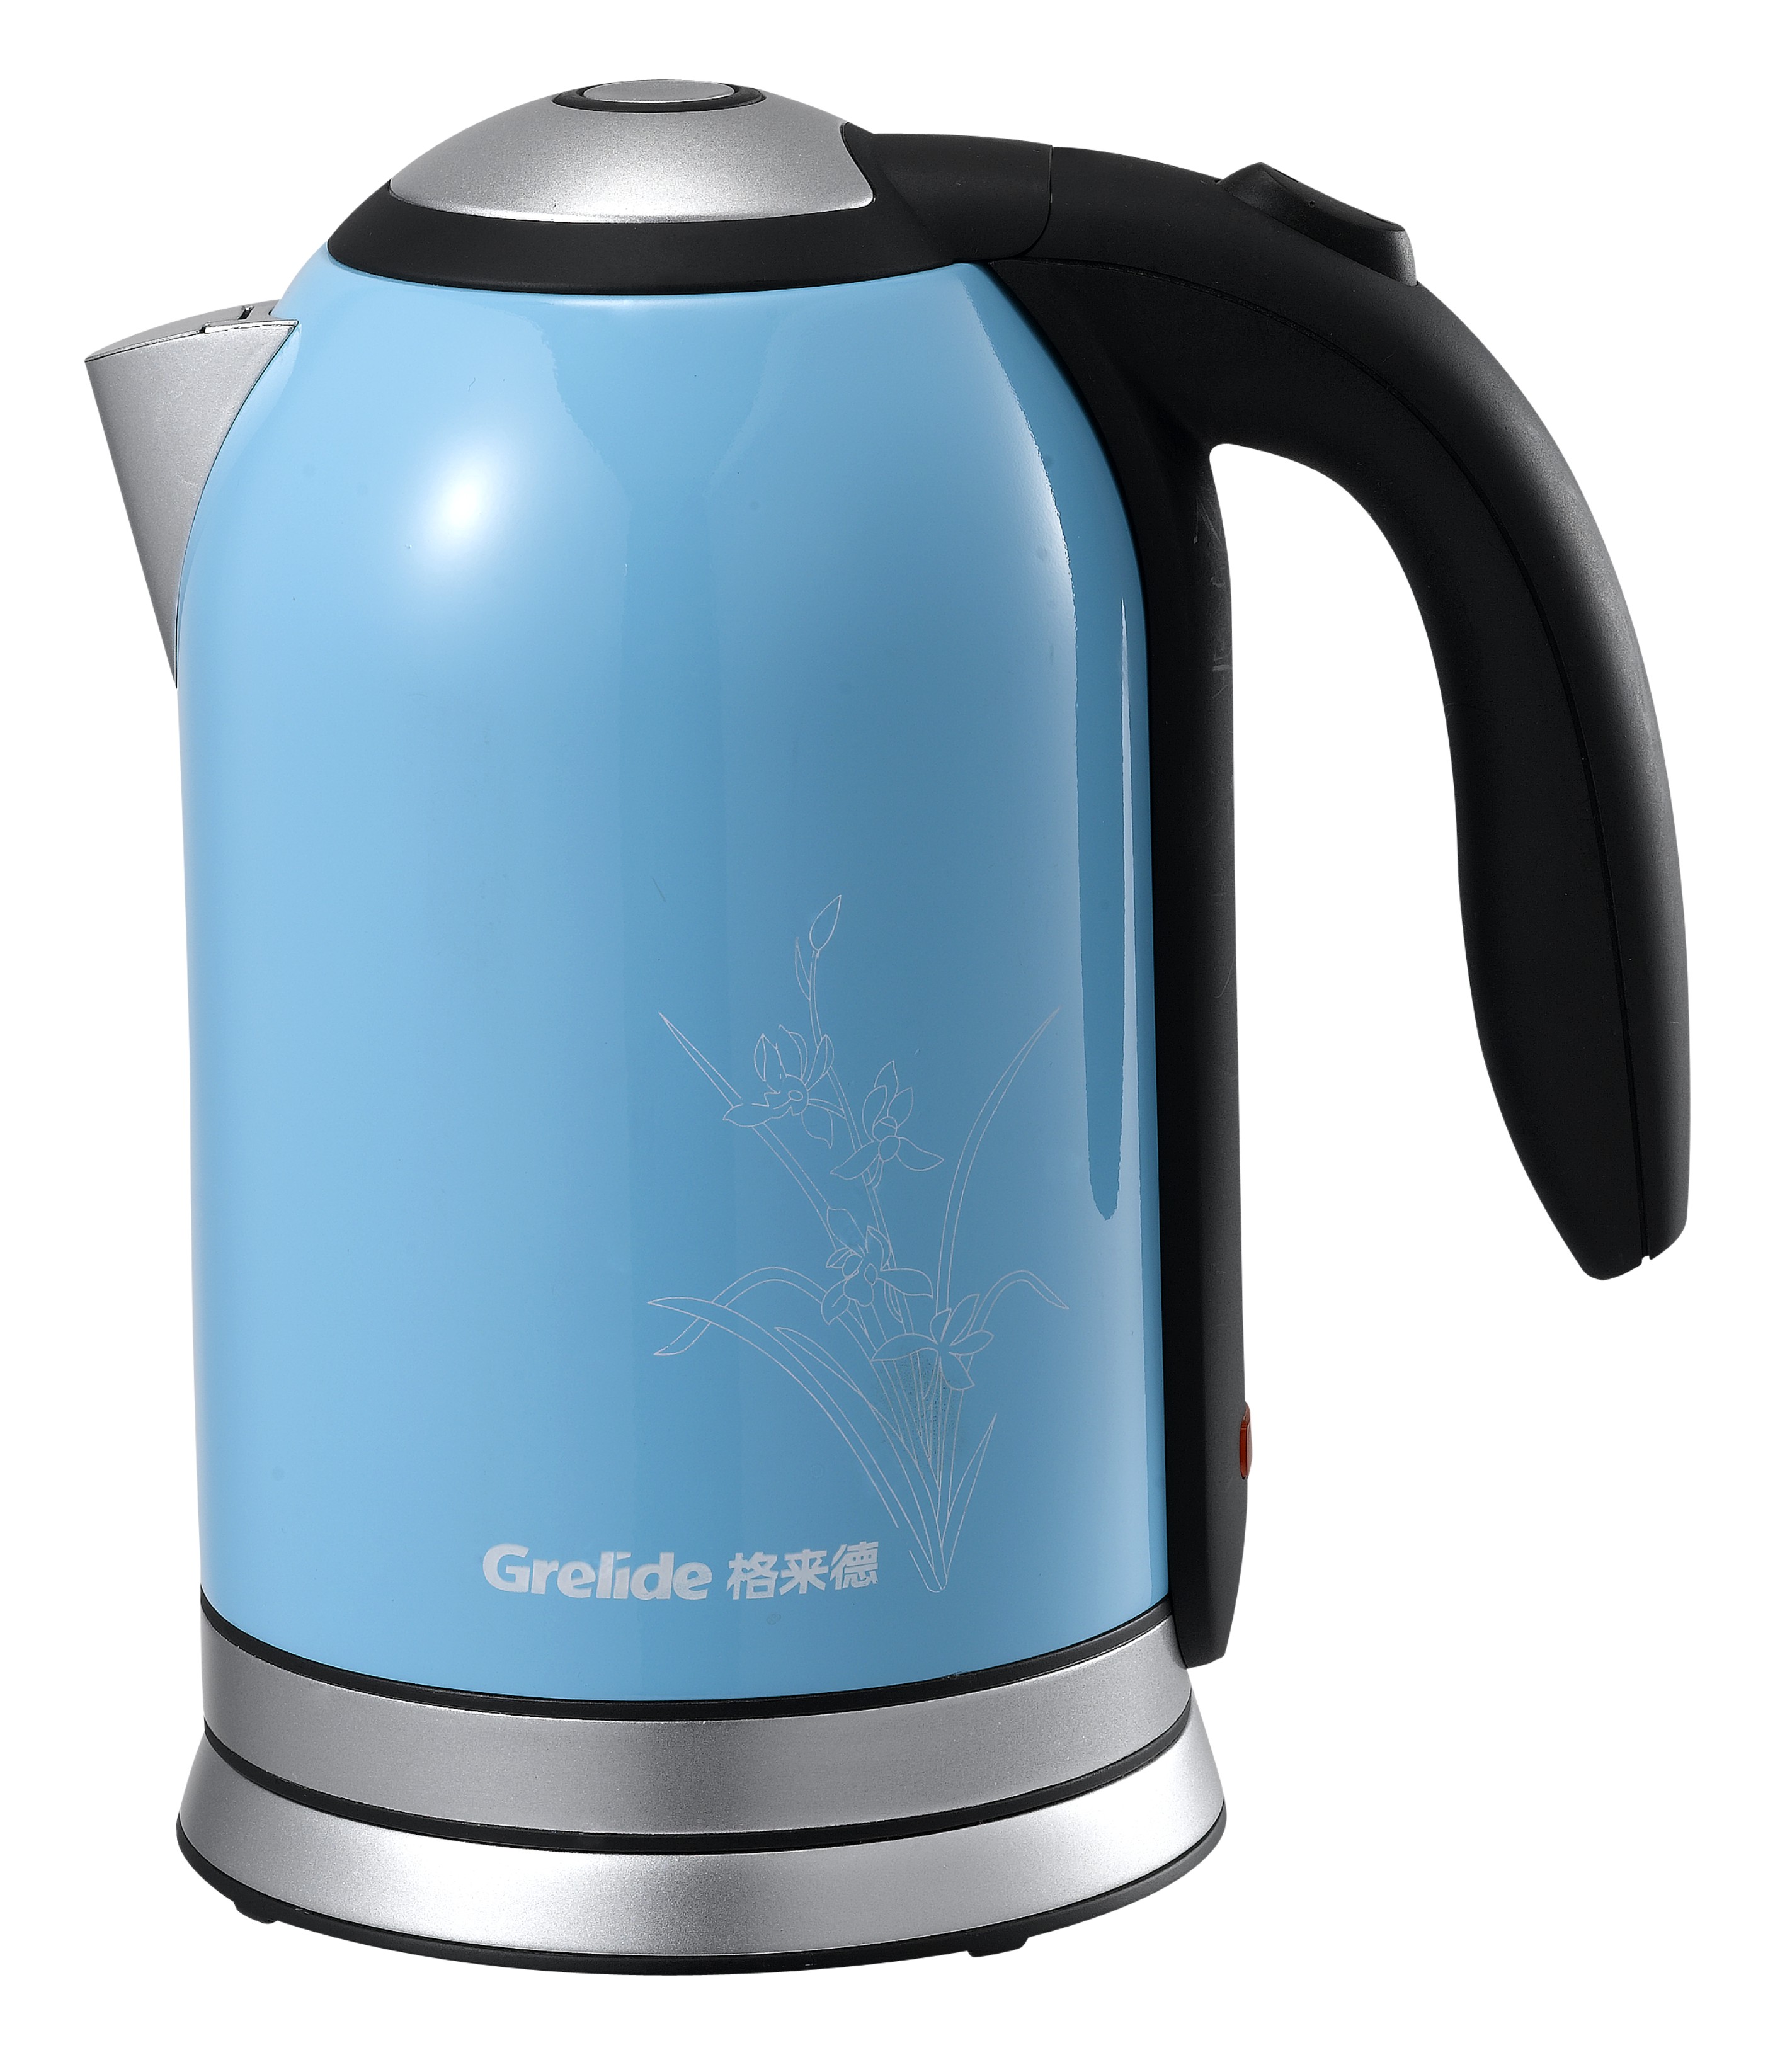 <img src='../manage/Upload/Pic/201332315431328.jpg' width='220' style='border:3px solid #EEEEEE;'><div align=center>name:New Kettle Stainless Steel of 1.8L (WKF-718S)number1Price:0 </div>